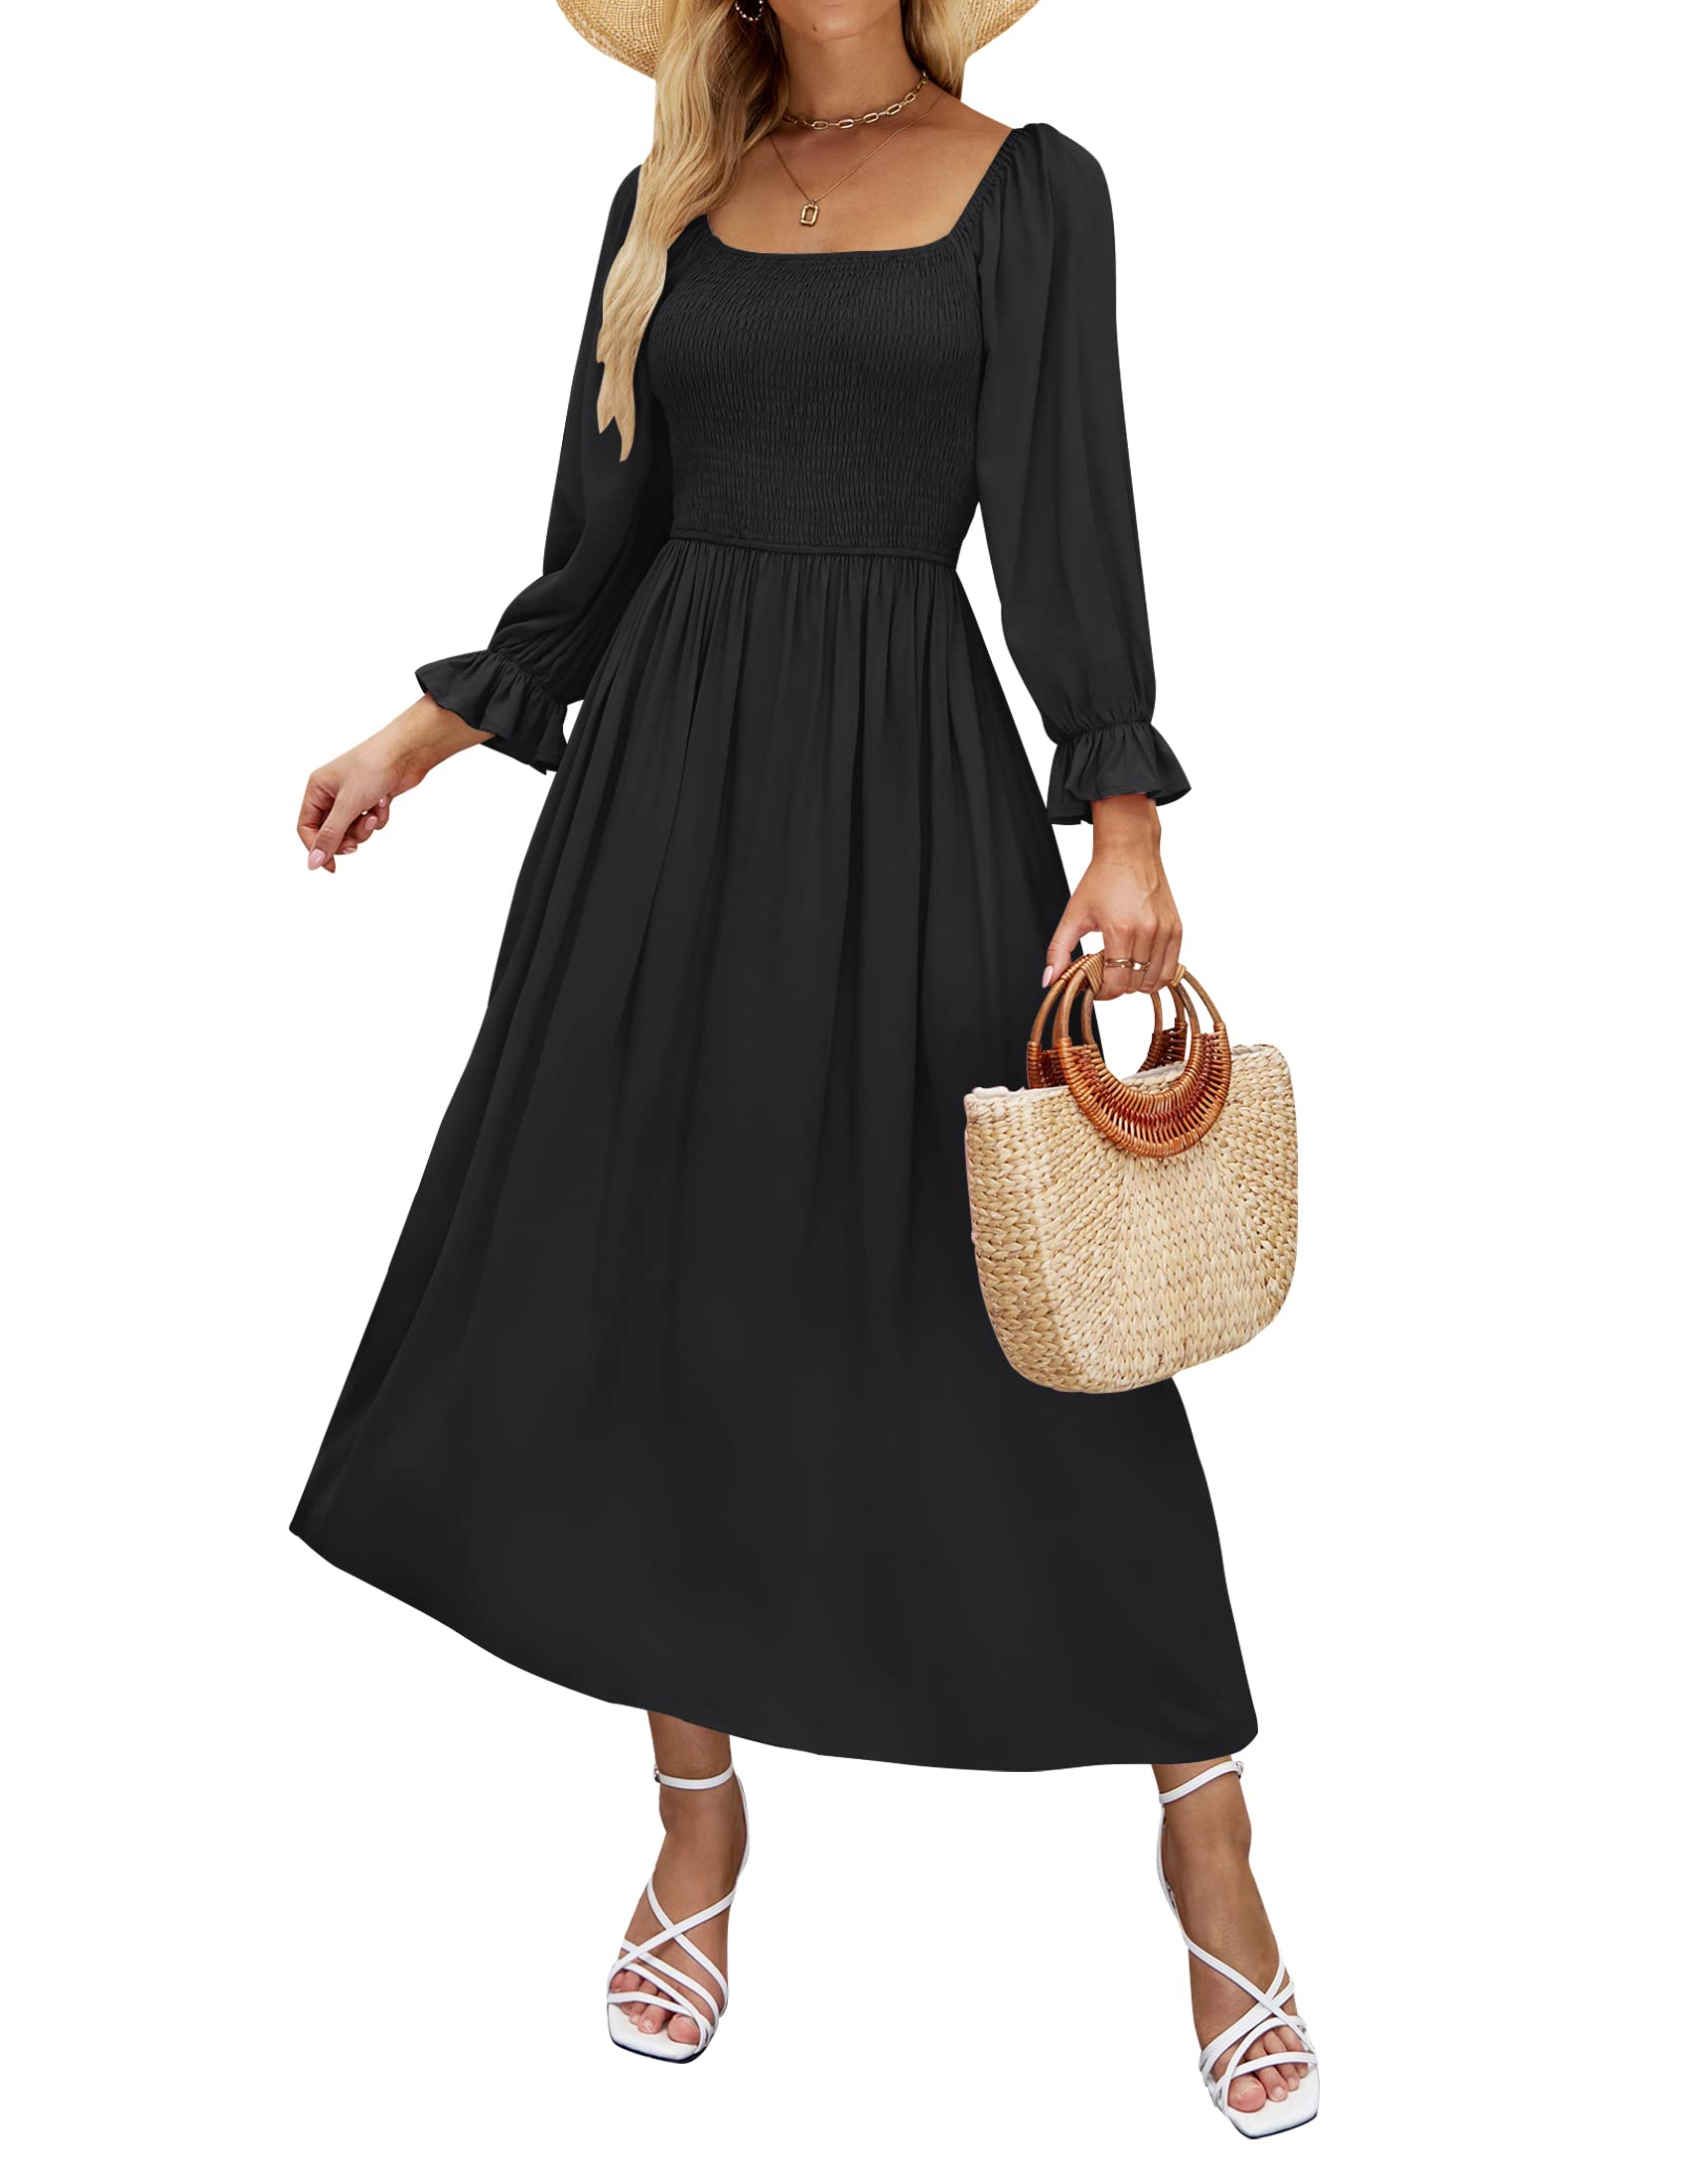 ZESICA Women's Casual Square Neck 3/4 Puff Sleeve Solid Color Smocked High Waist Flowy Midi Dress